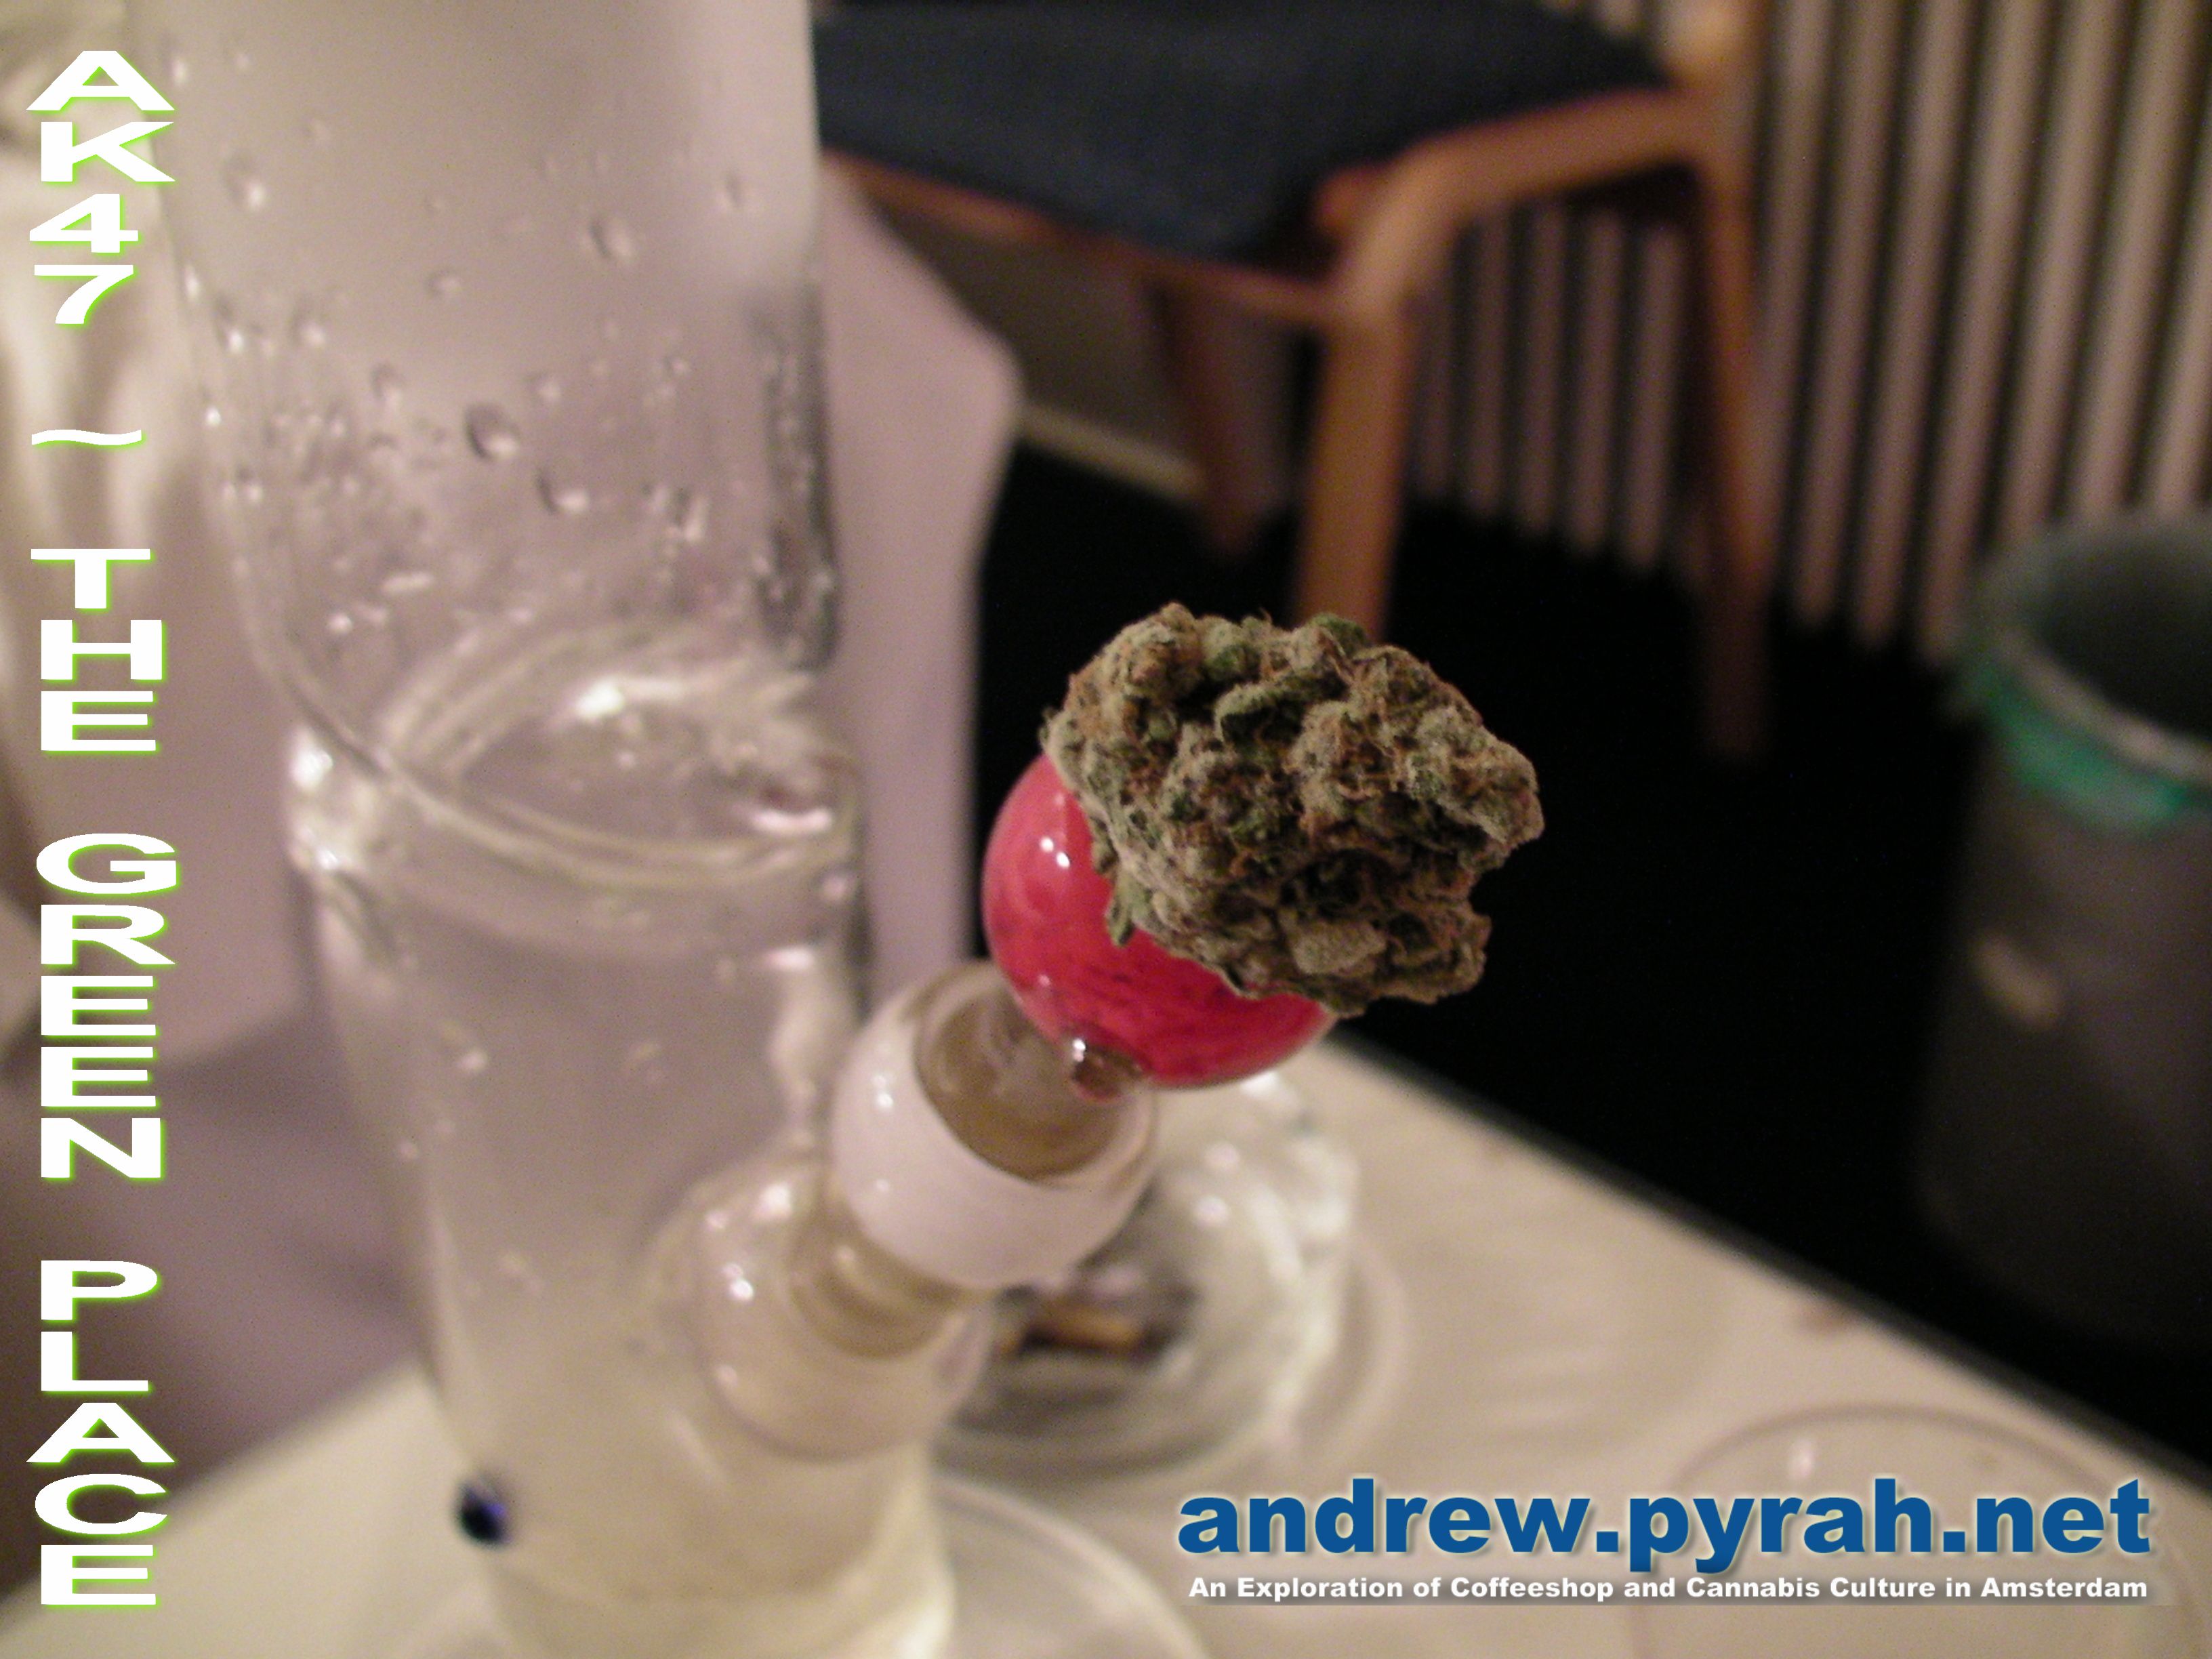 NEW VIDEO SCHEDULE – YOU DECIDE! Amsterdam Weed Review – andrewpyrah channel